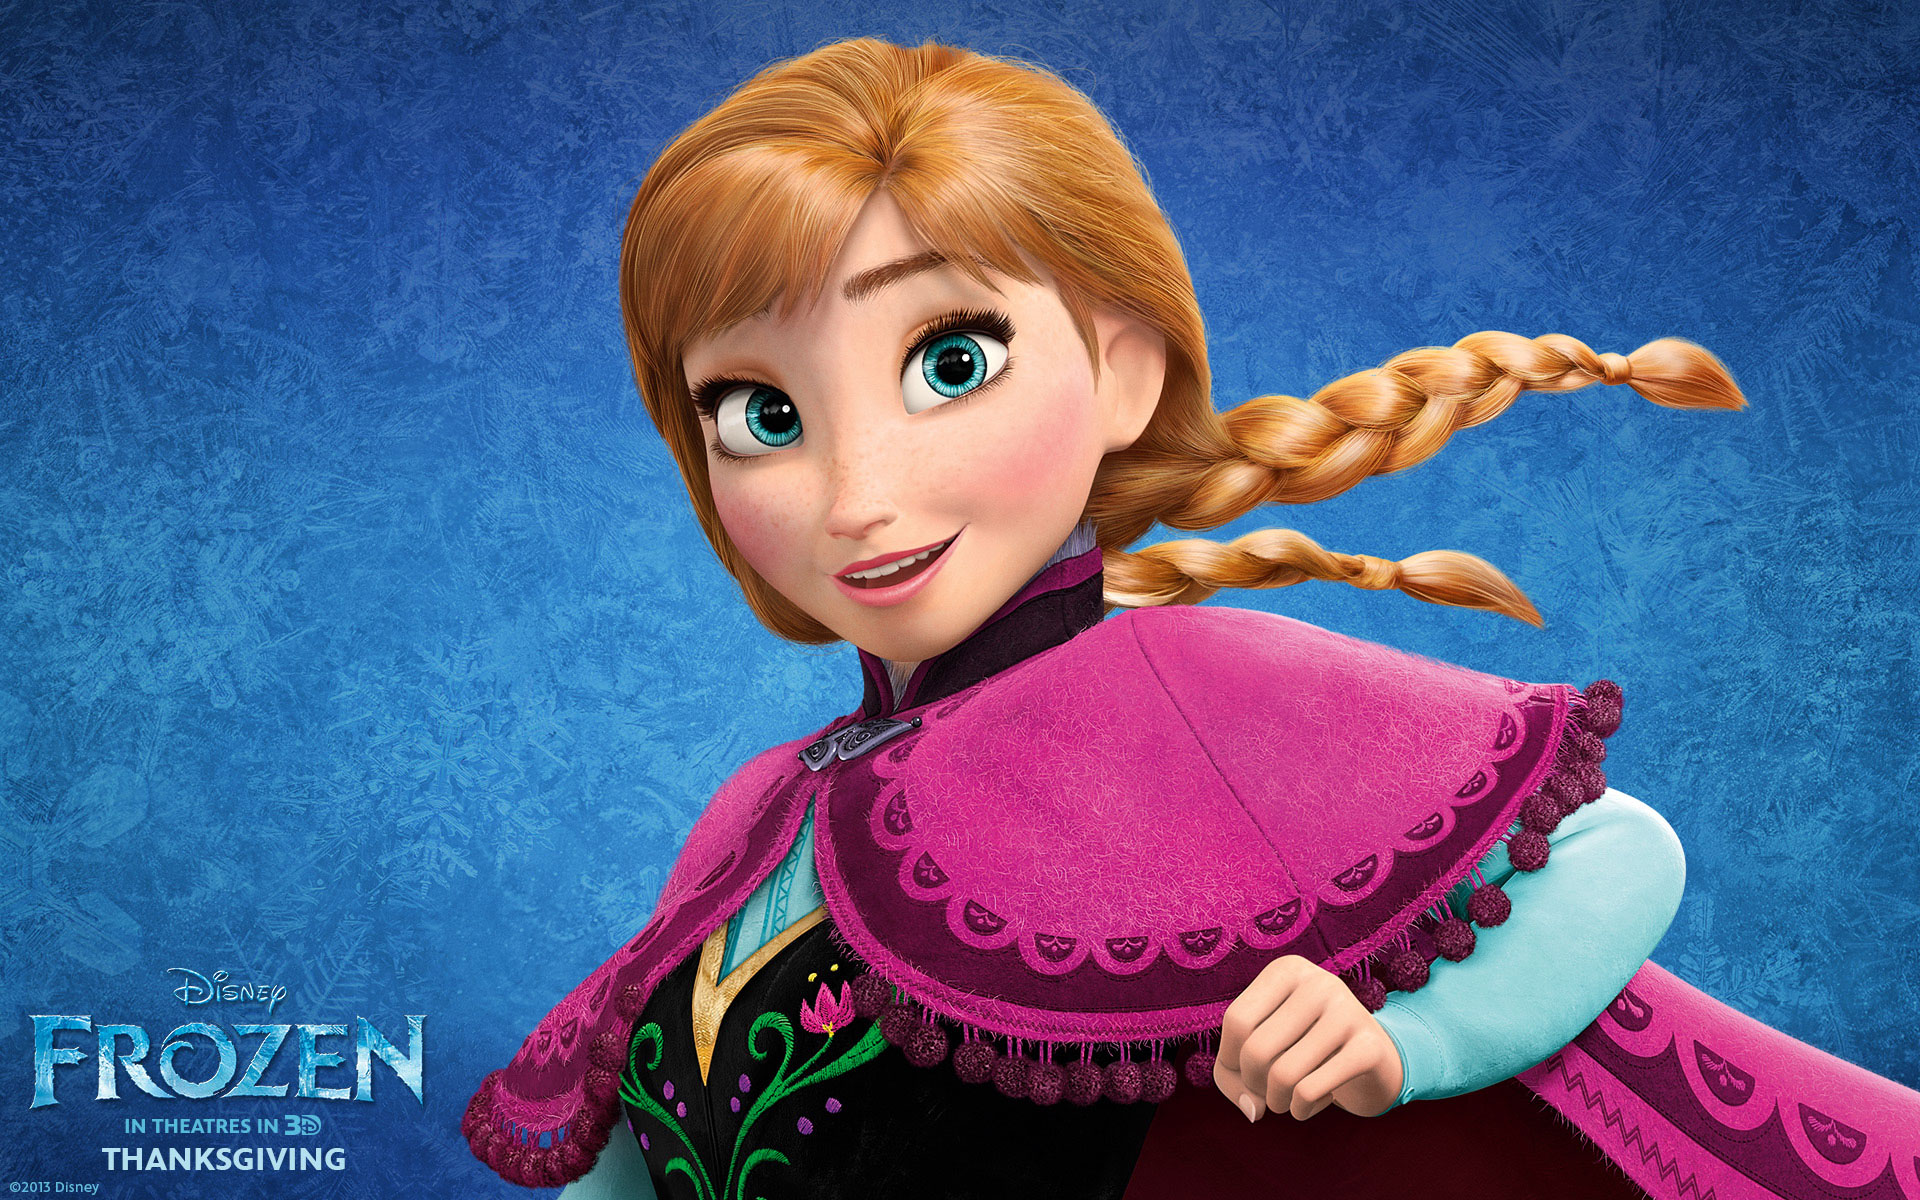 Frozen 2013 Movie Wallpapers [HD] Facebook Timeline Covers 1920x1200